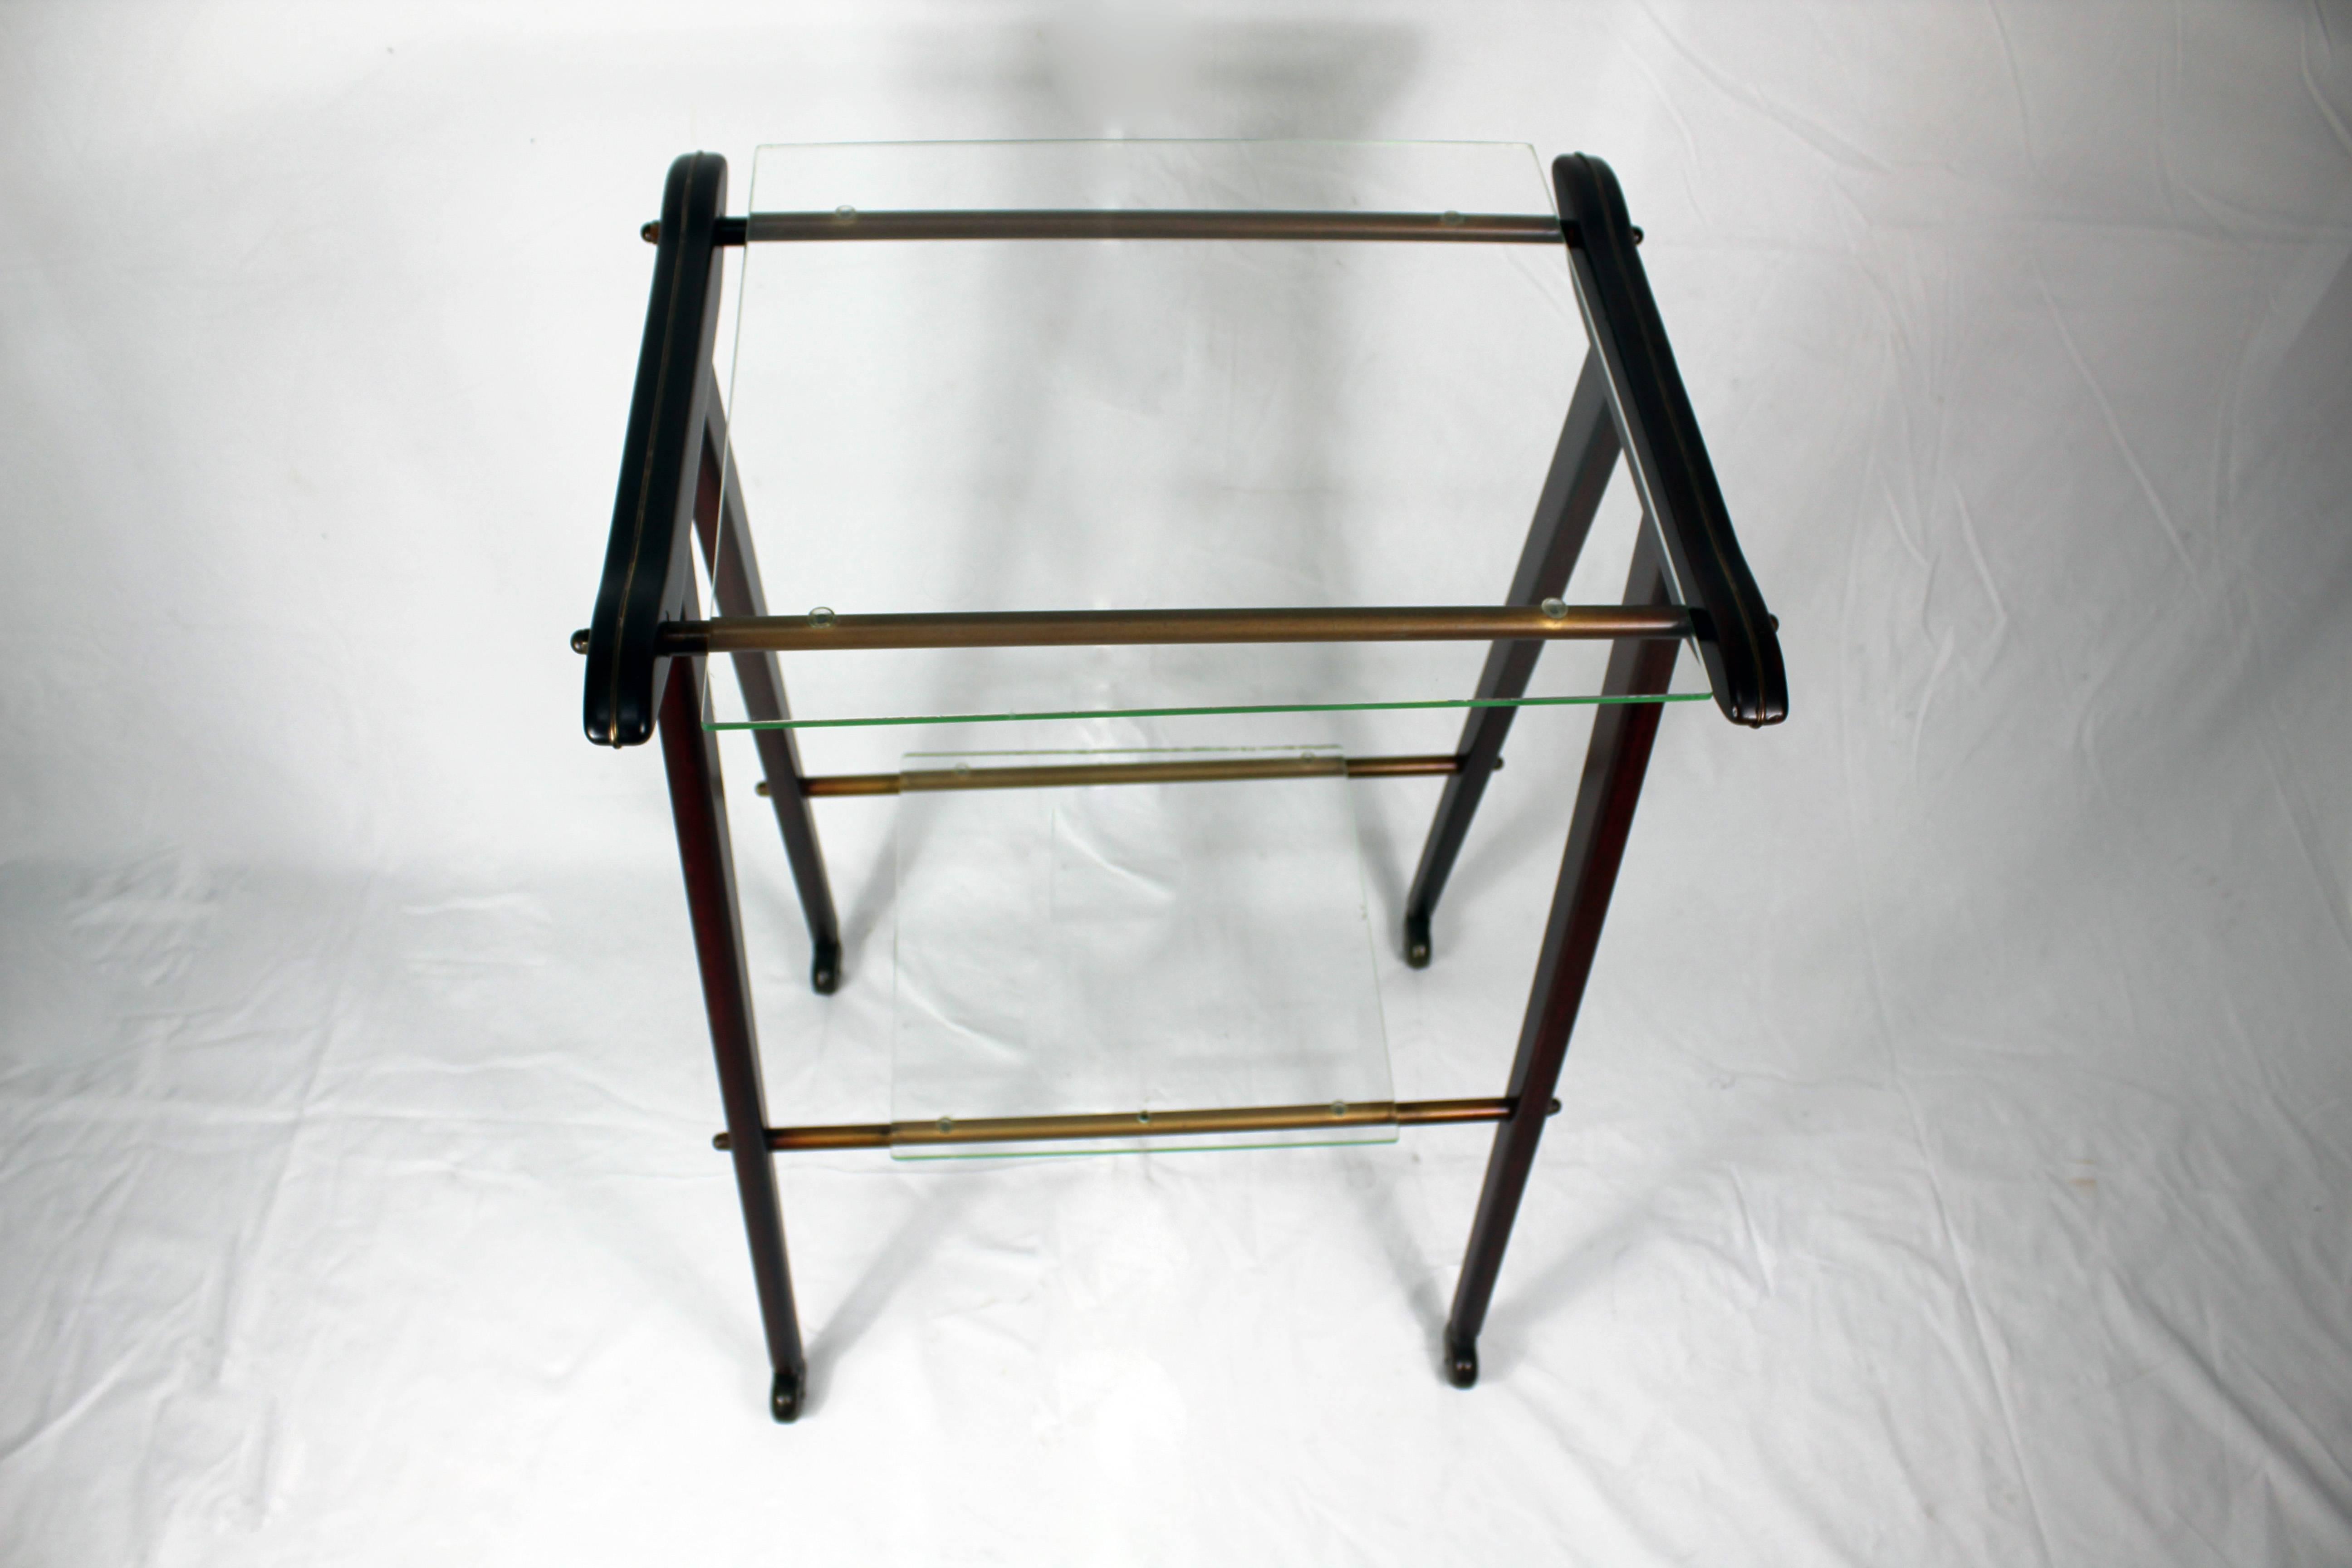 Television table made of wood with two removable glass racks. 
Made in Italy, circa 1950.
Restored.